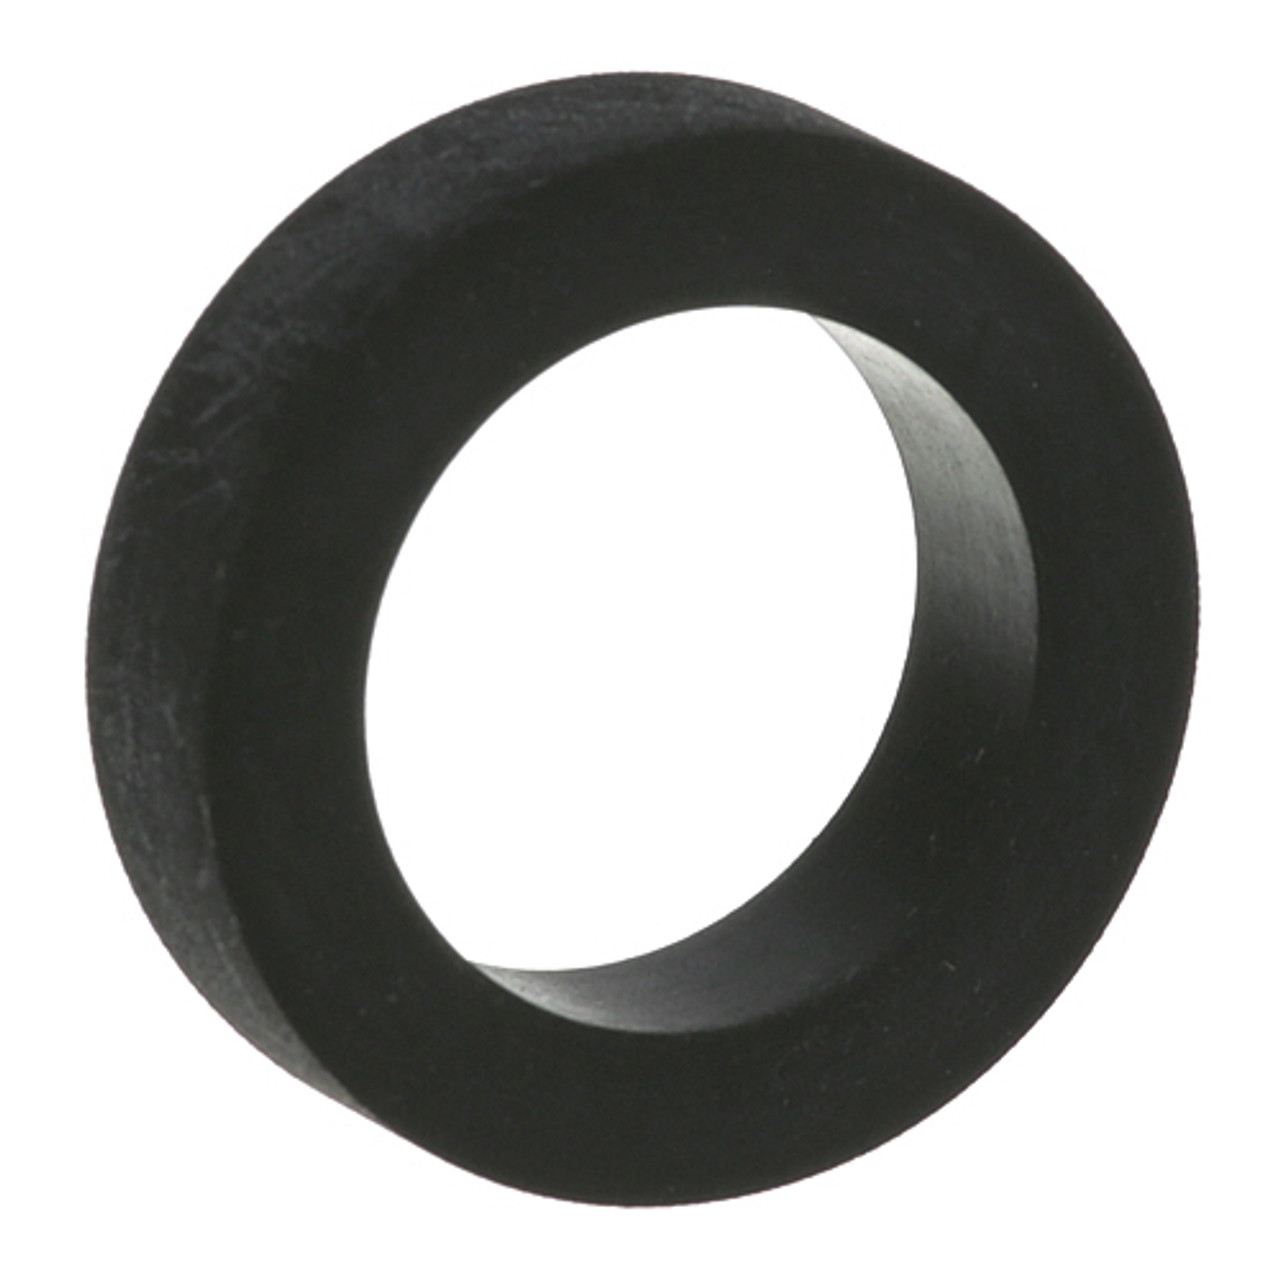 Gasket 1-5/8" D. - Replacement Part For Cecilware M018A